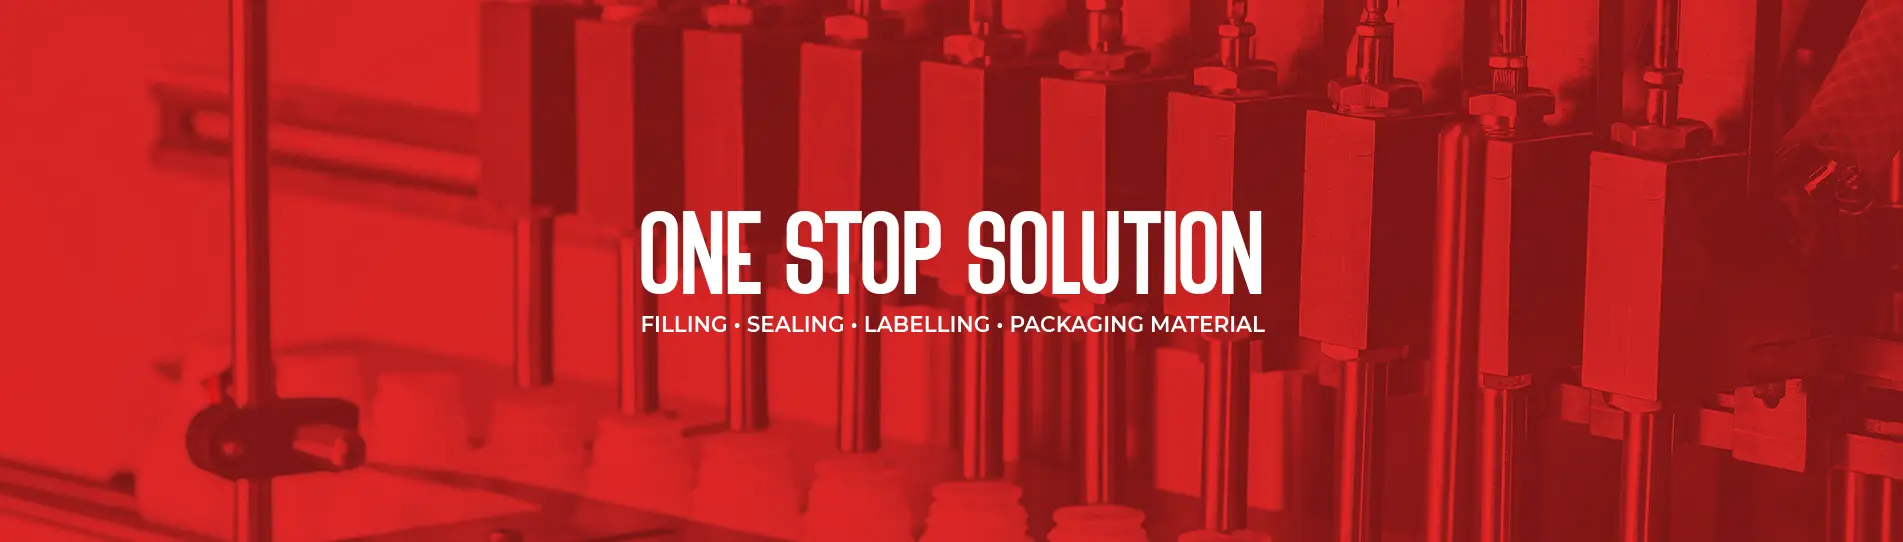 One stop solution for filling, sealing, sticker labelling, packaging materials, carton packing, and flow wrap packaging.